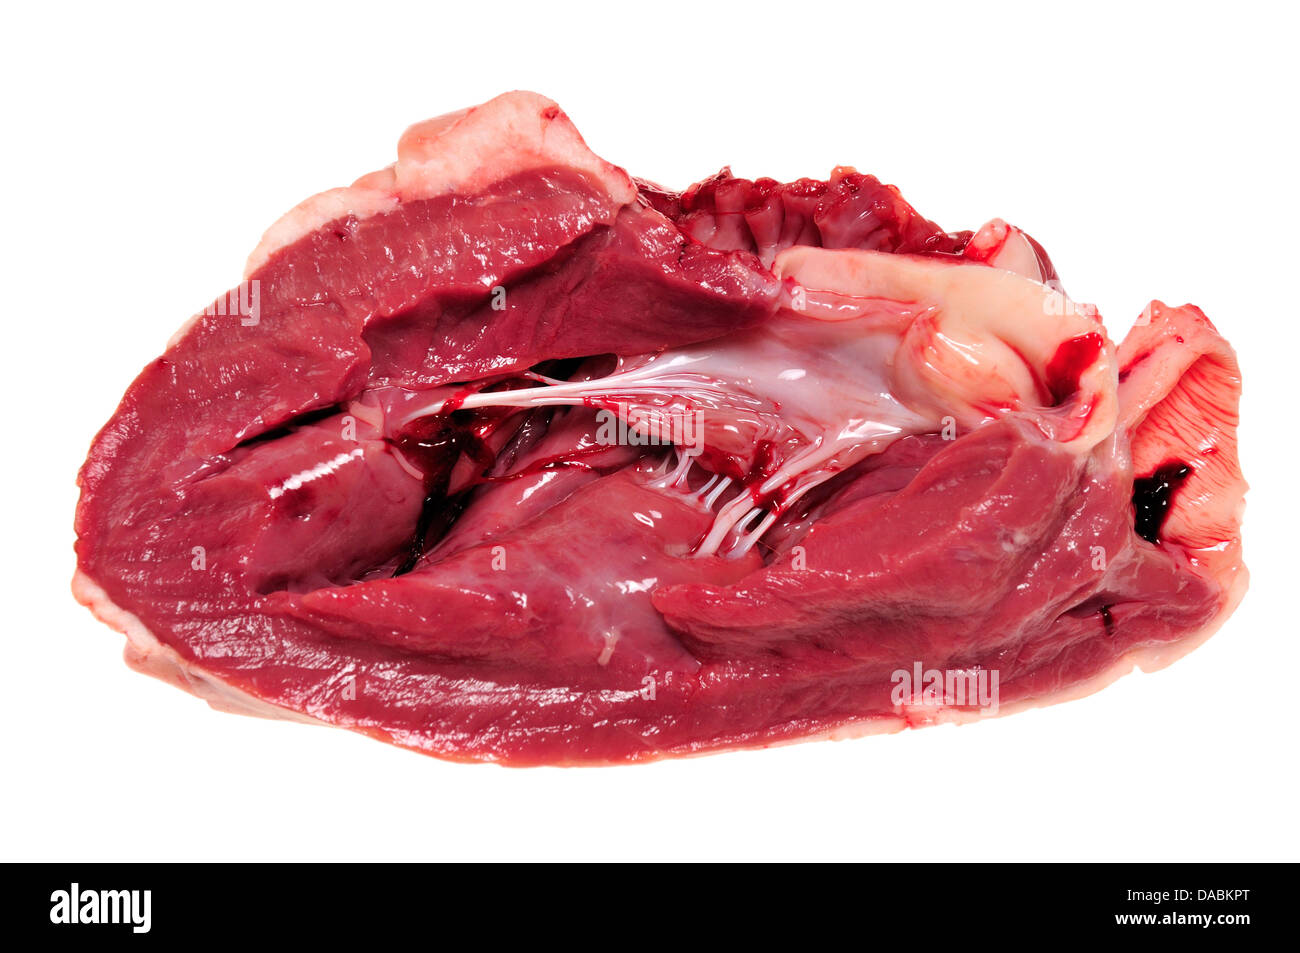 Sheep's heart - cut open showing ventricles and valves Stock Photo